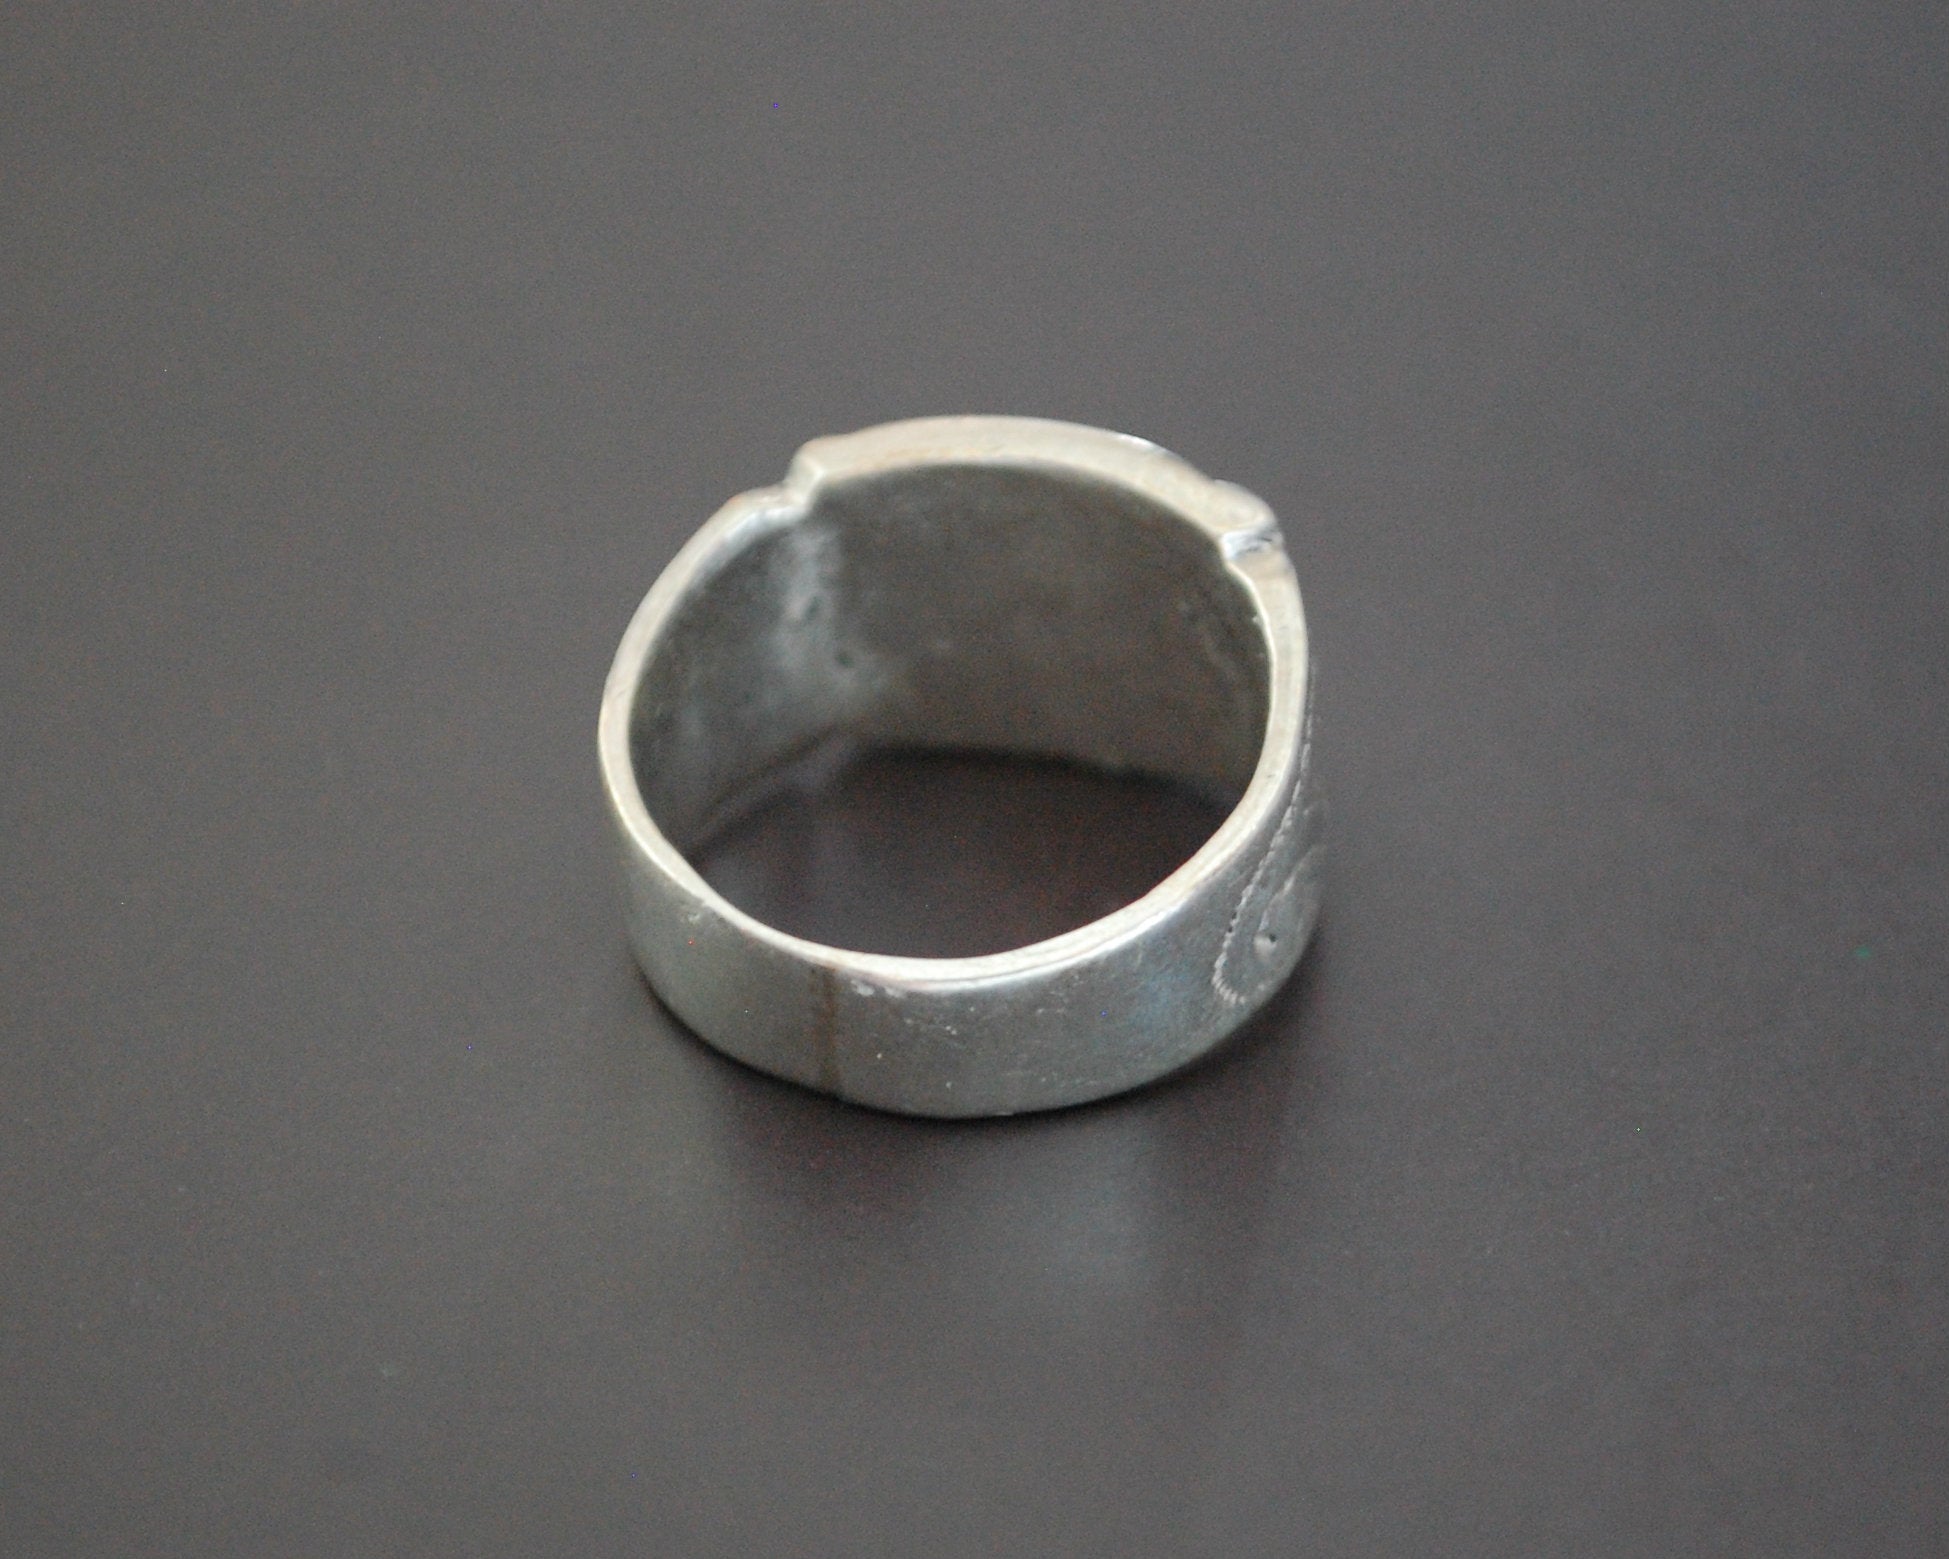 Berber Band Ring - Size 6.5